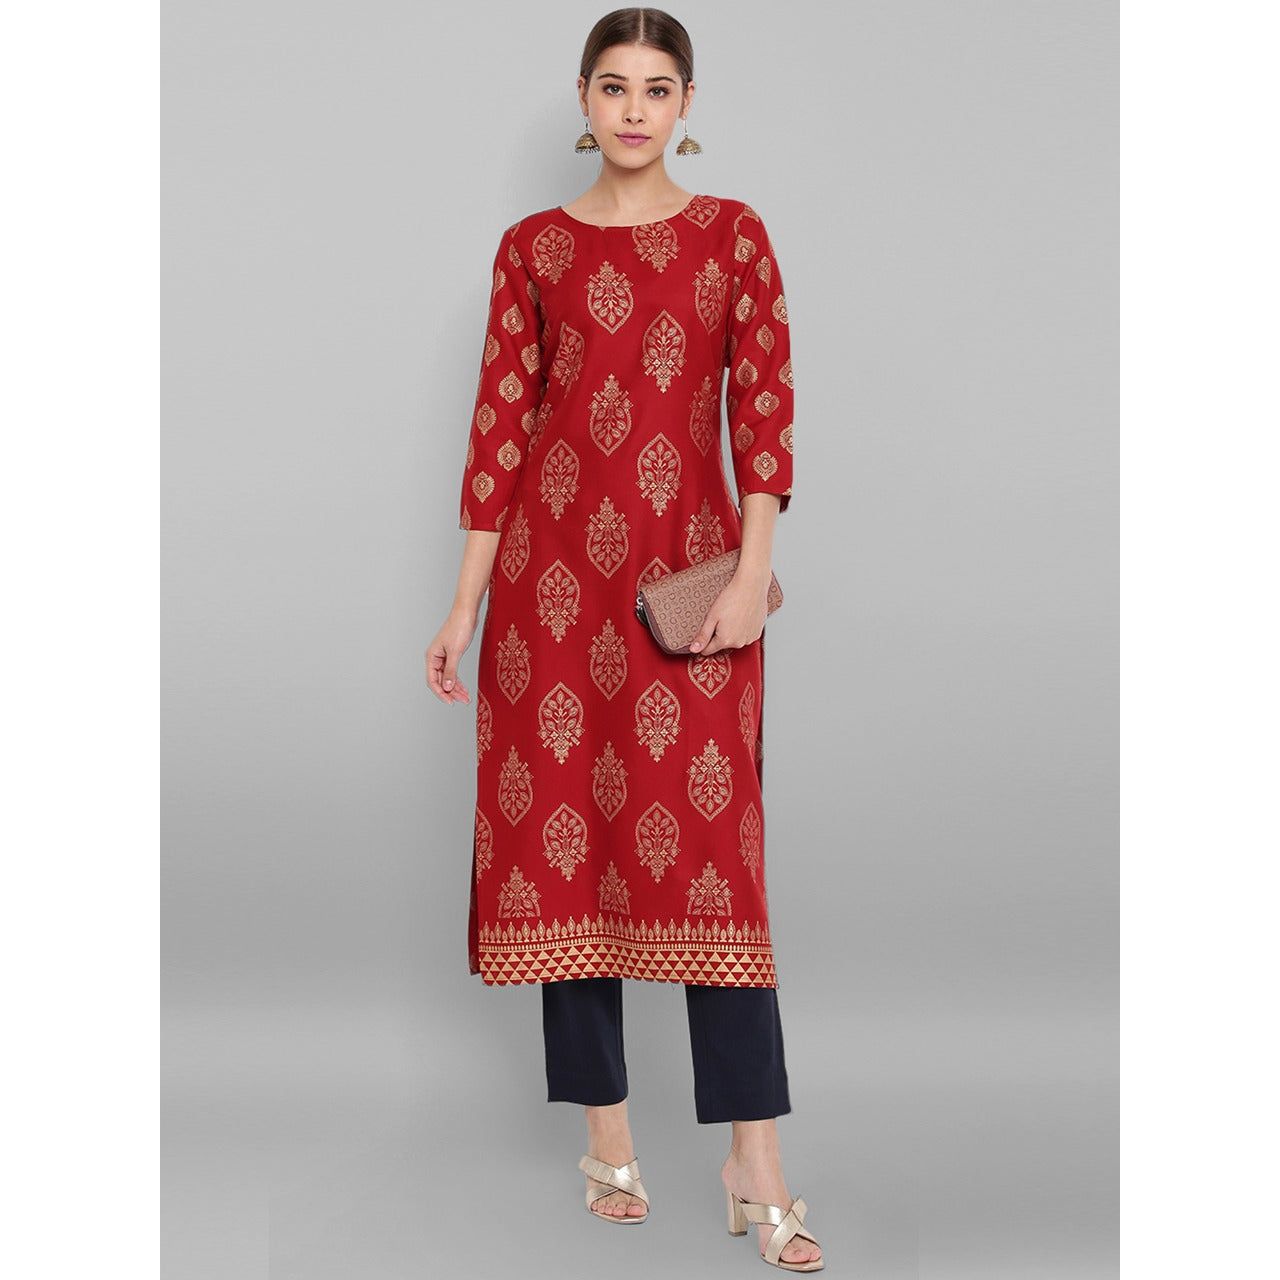 Red and Gold Indian Tunic Top/ Kurta For Women